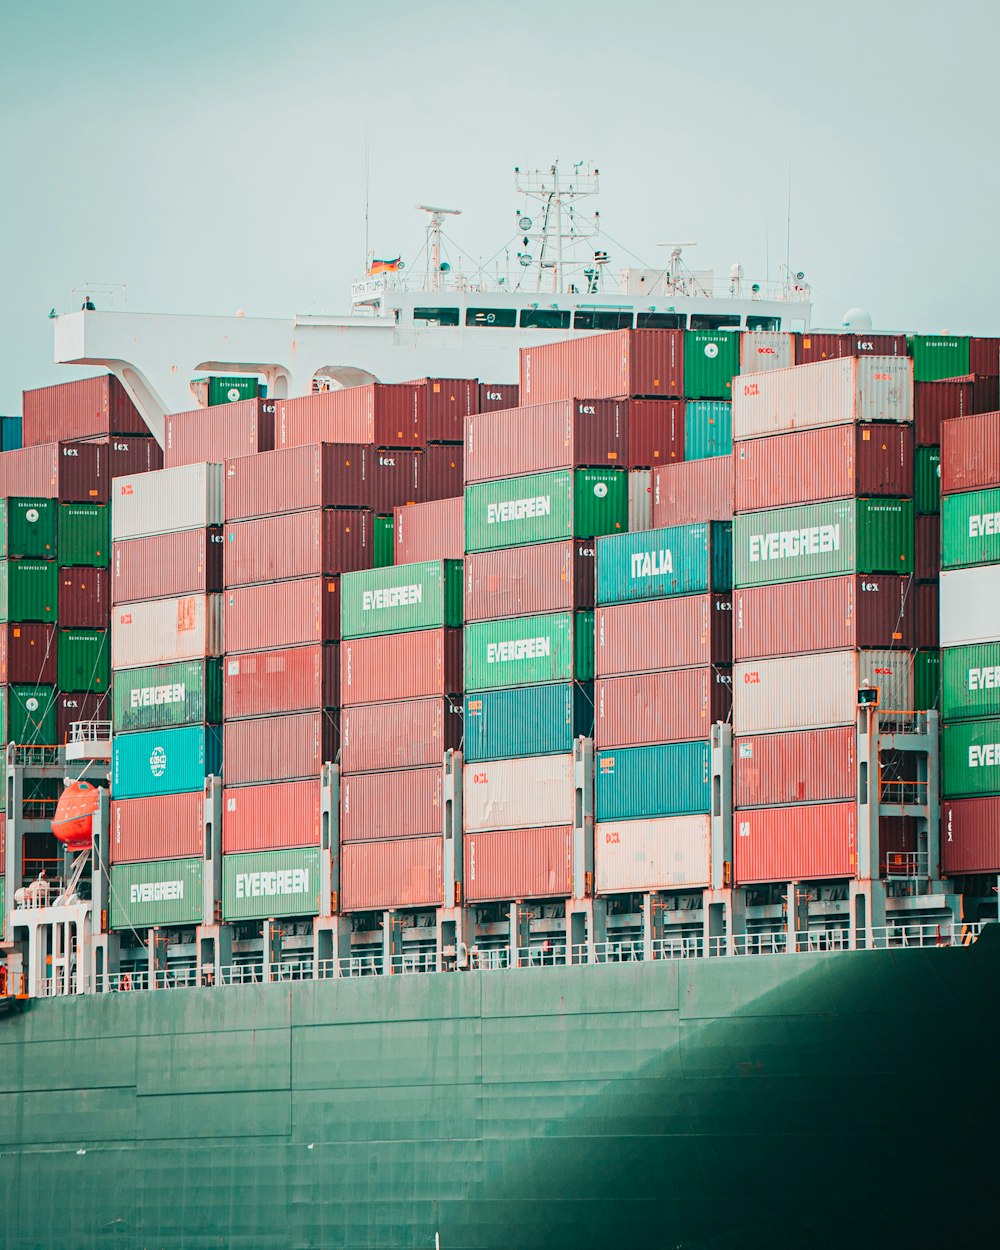 a large cargo ship loaded with lots of containers